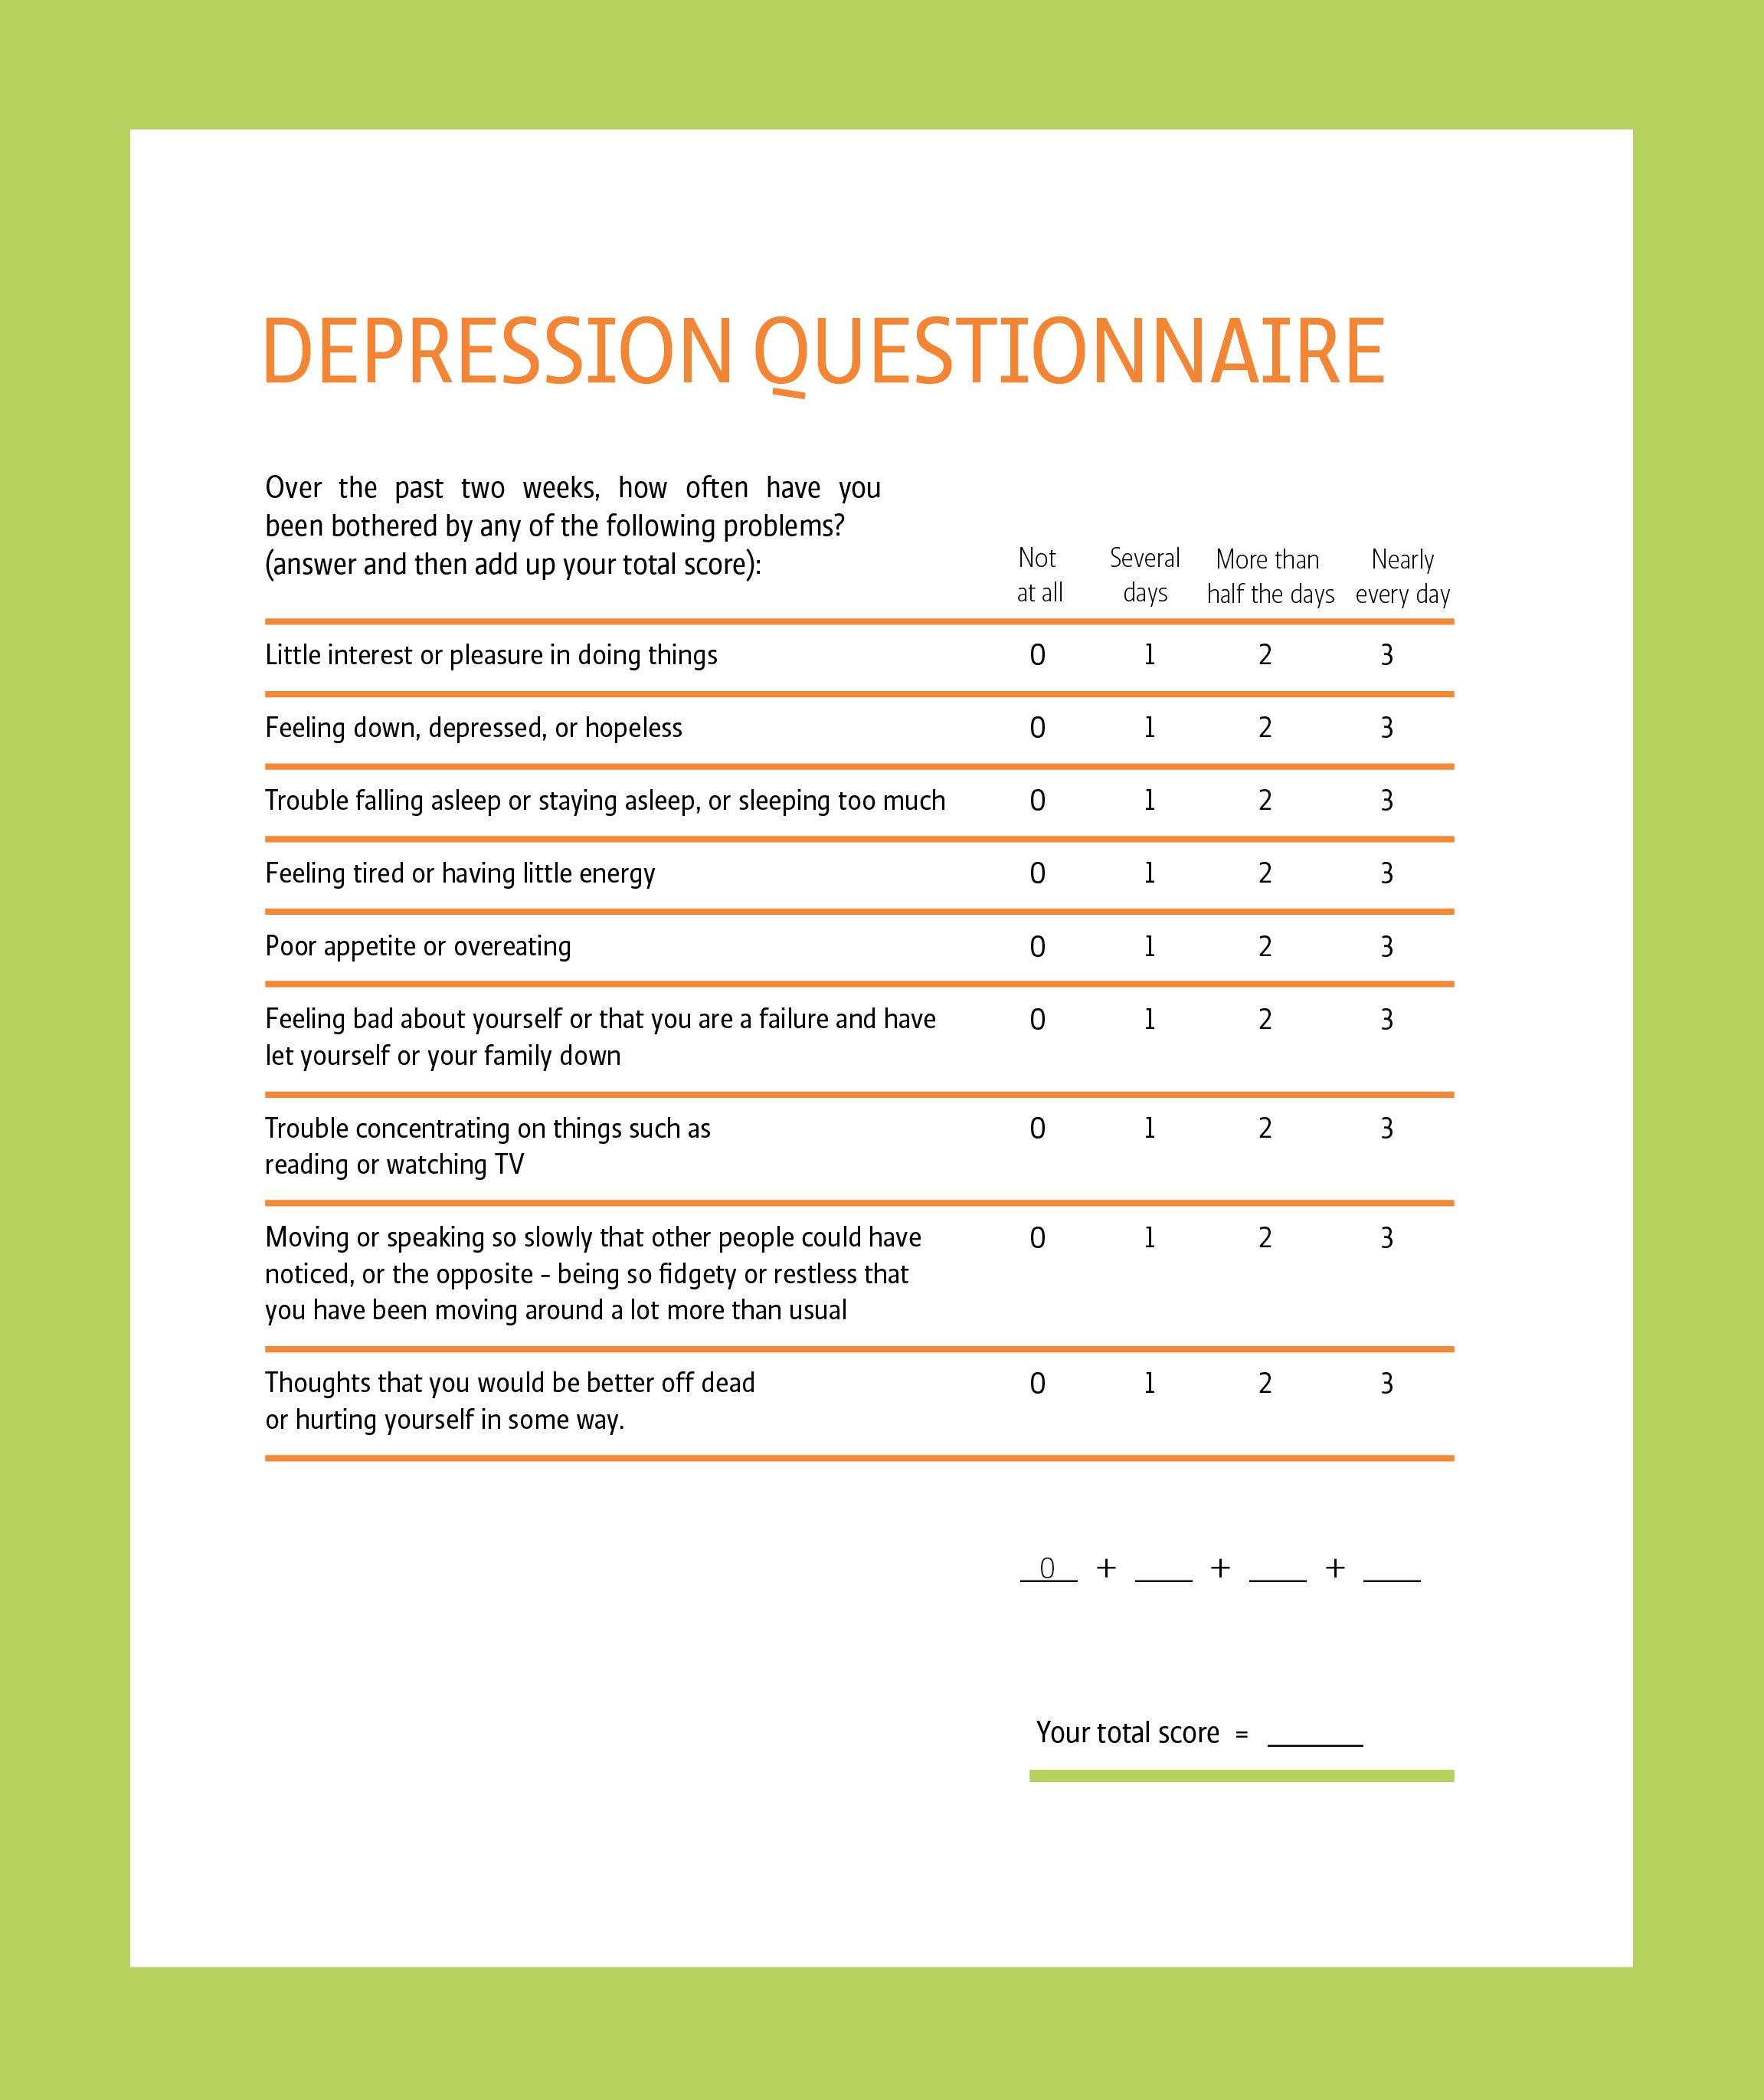 research question examples depression